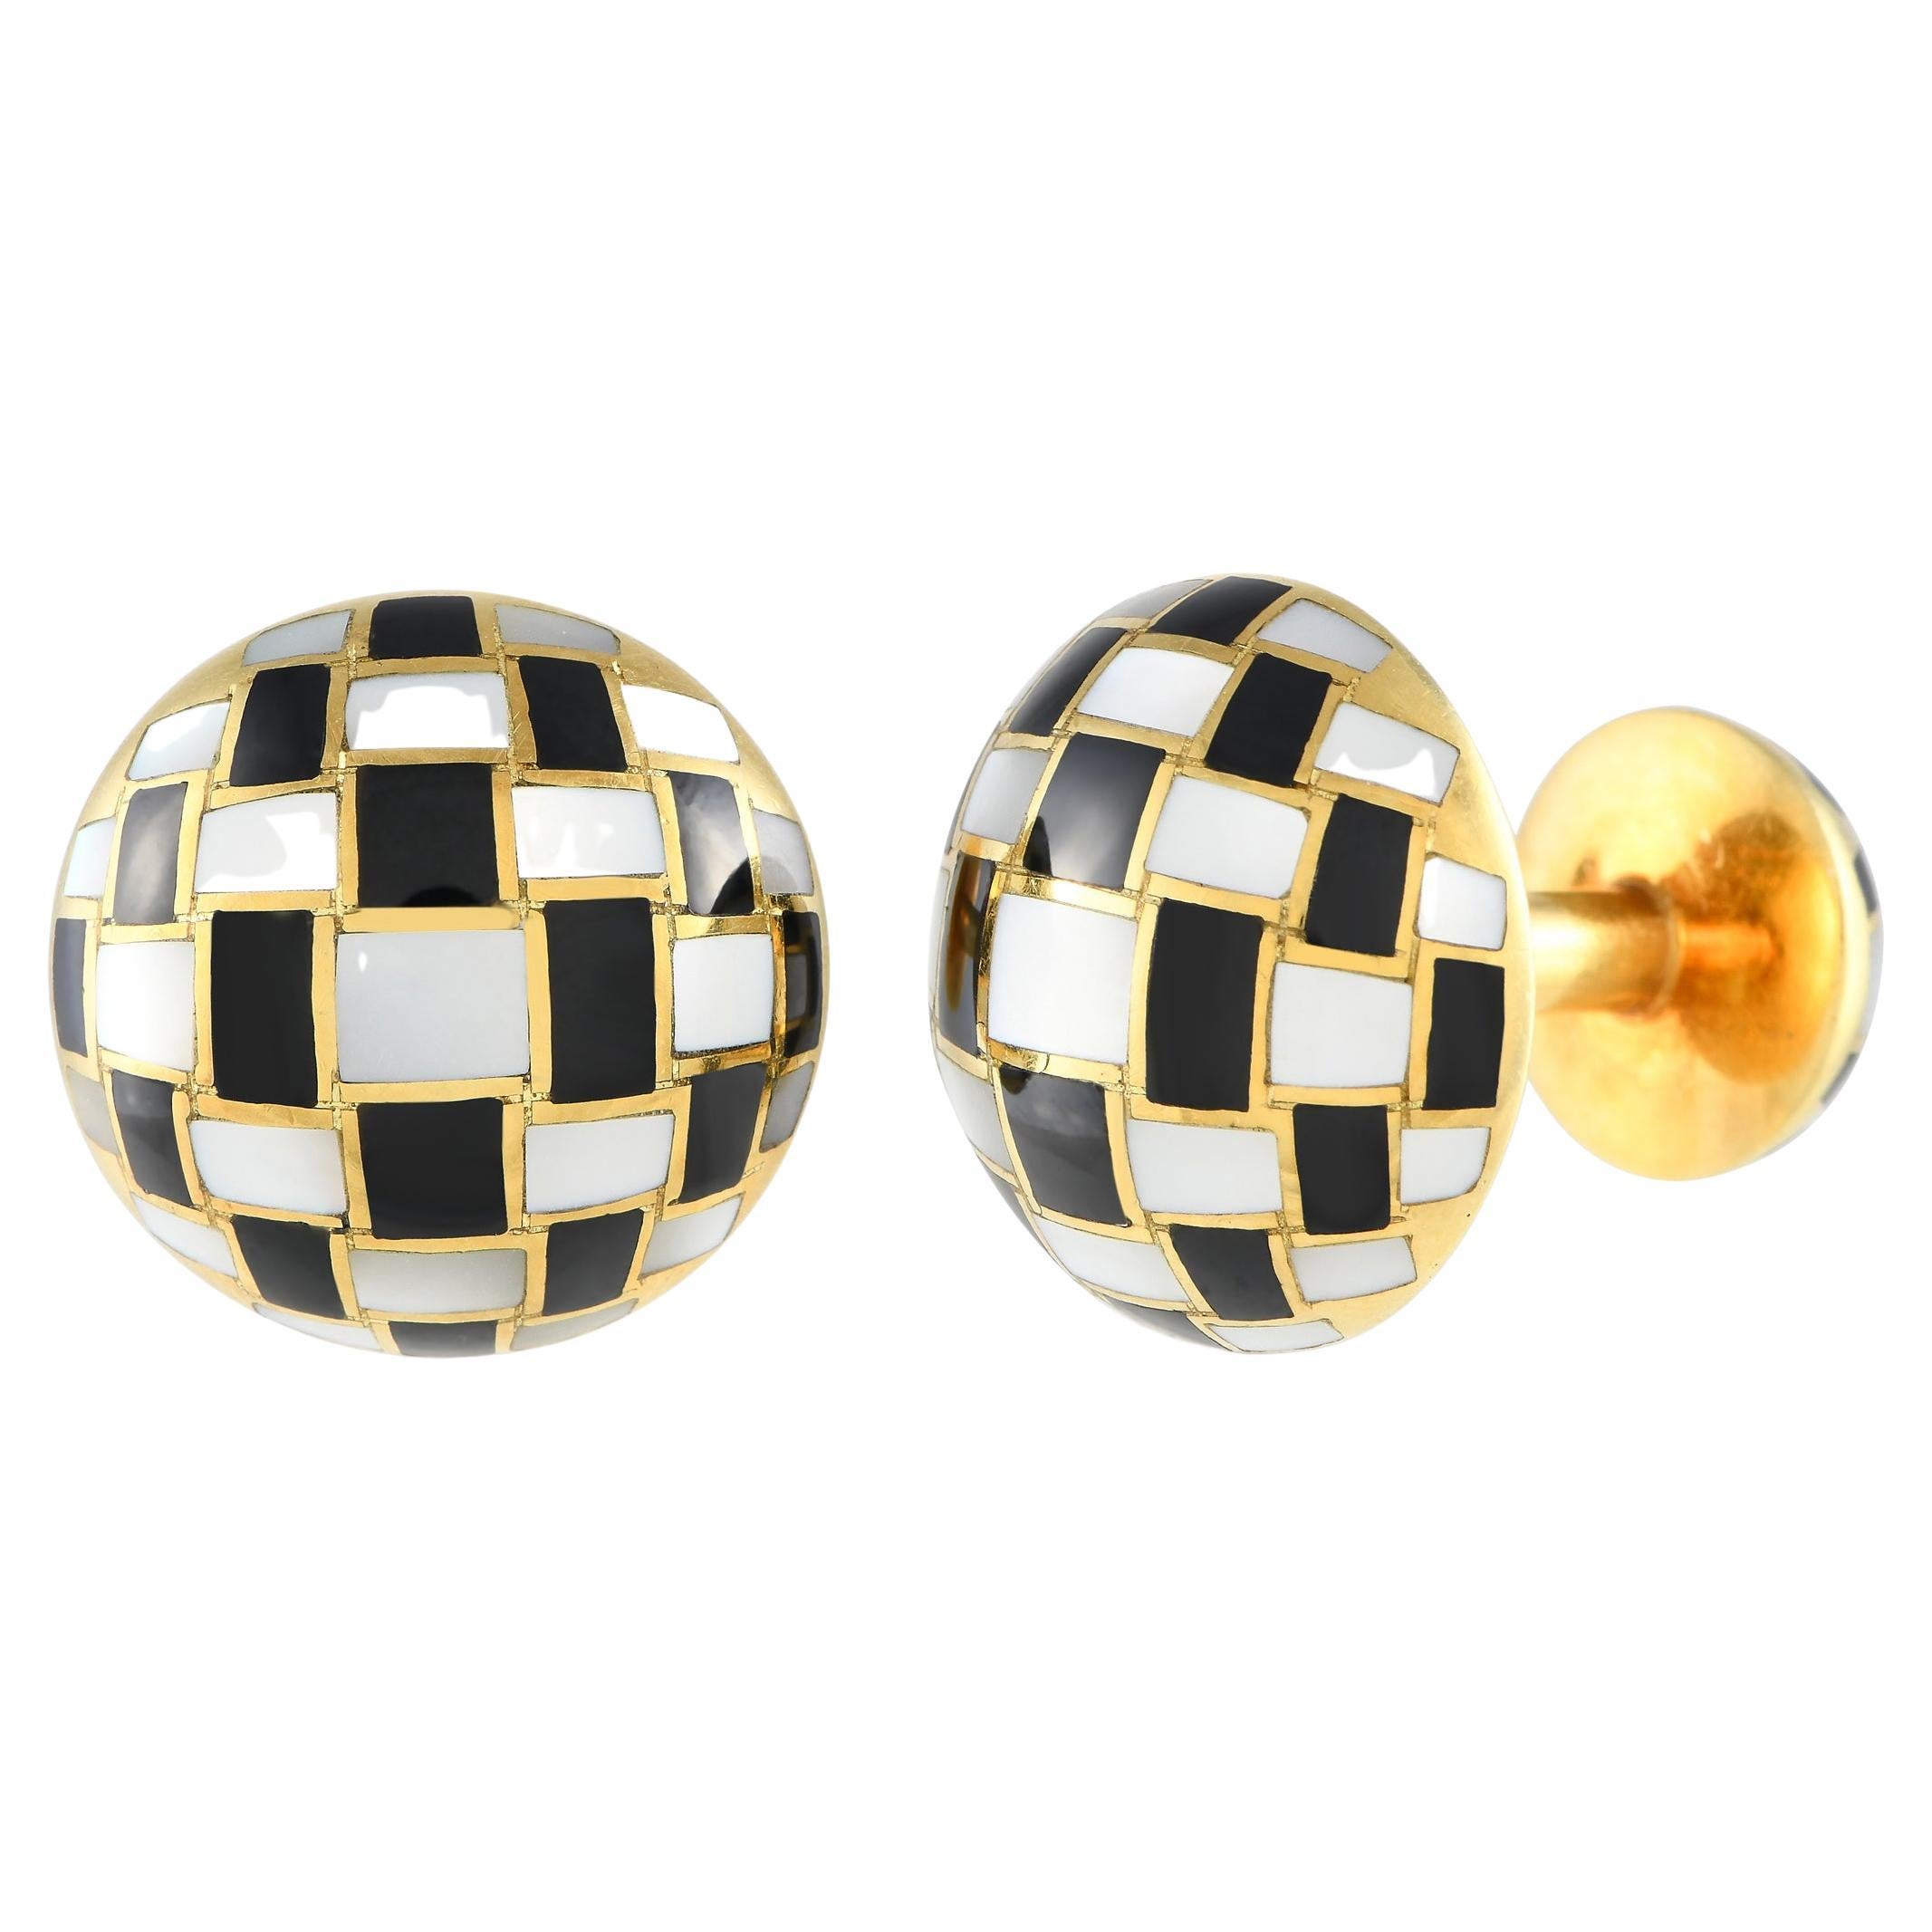 Tiffany & Co. 18K Yellow Gold Mother of Pearl and Onyx Inlaid Cufflinks